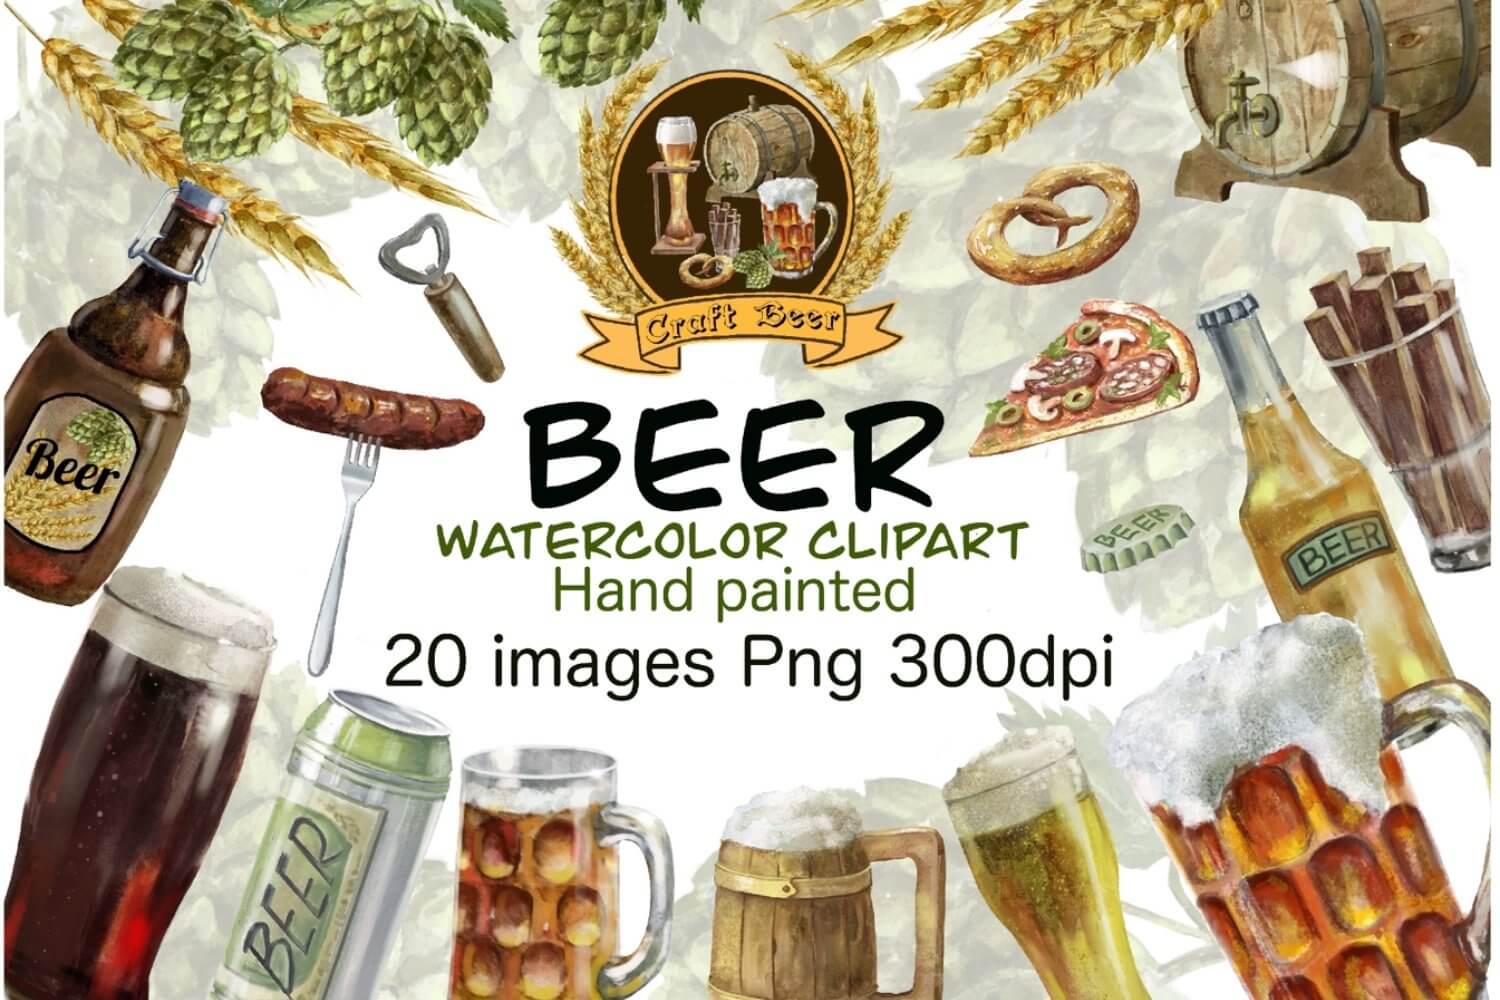 20 images of beer watercolor clipart hand painted.